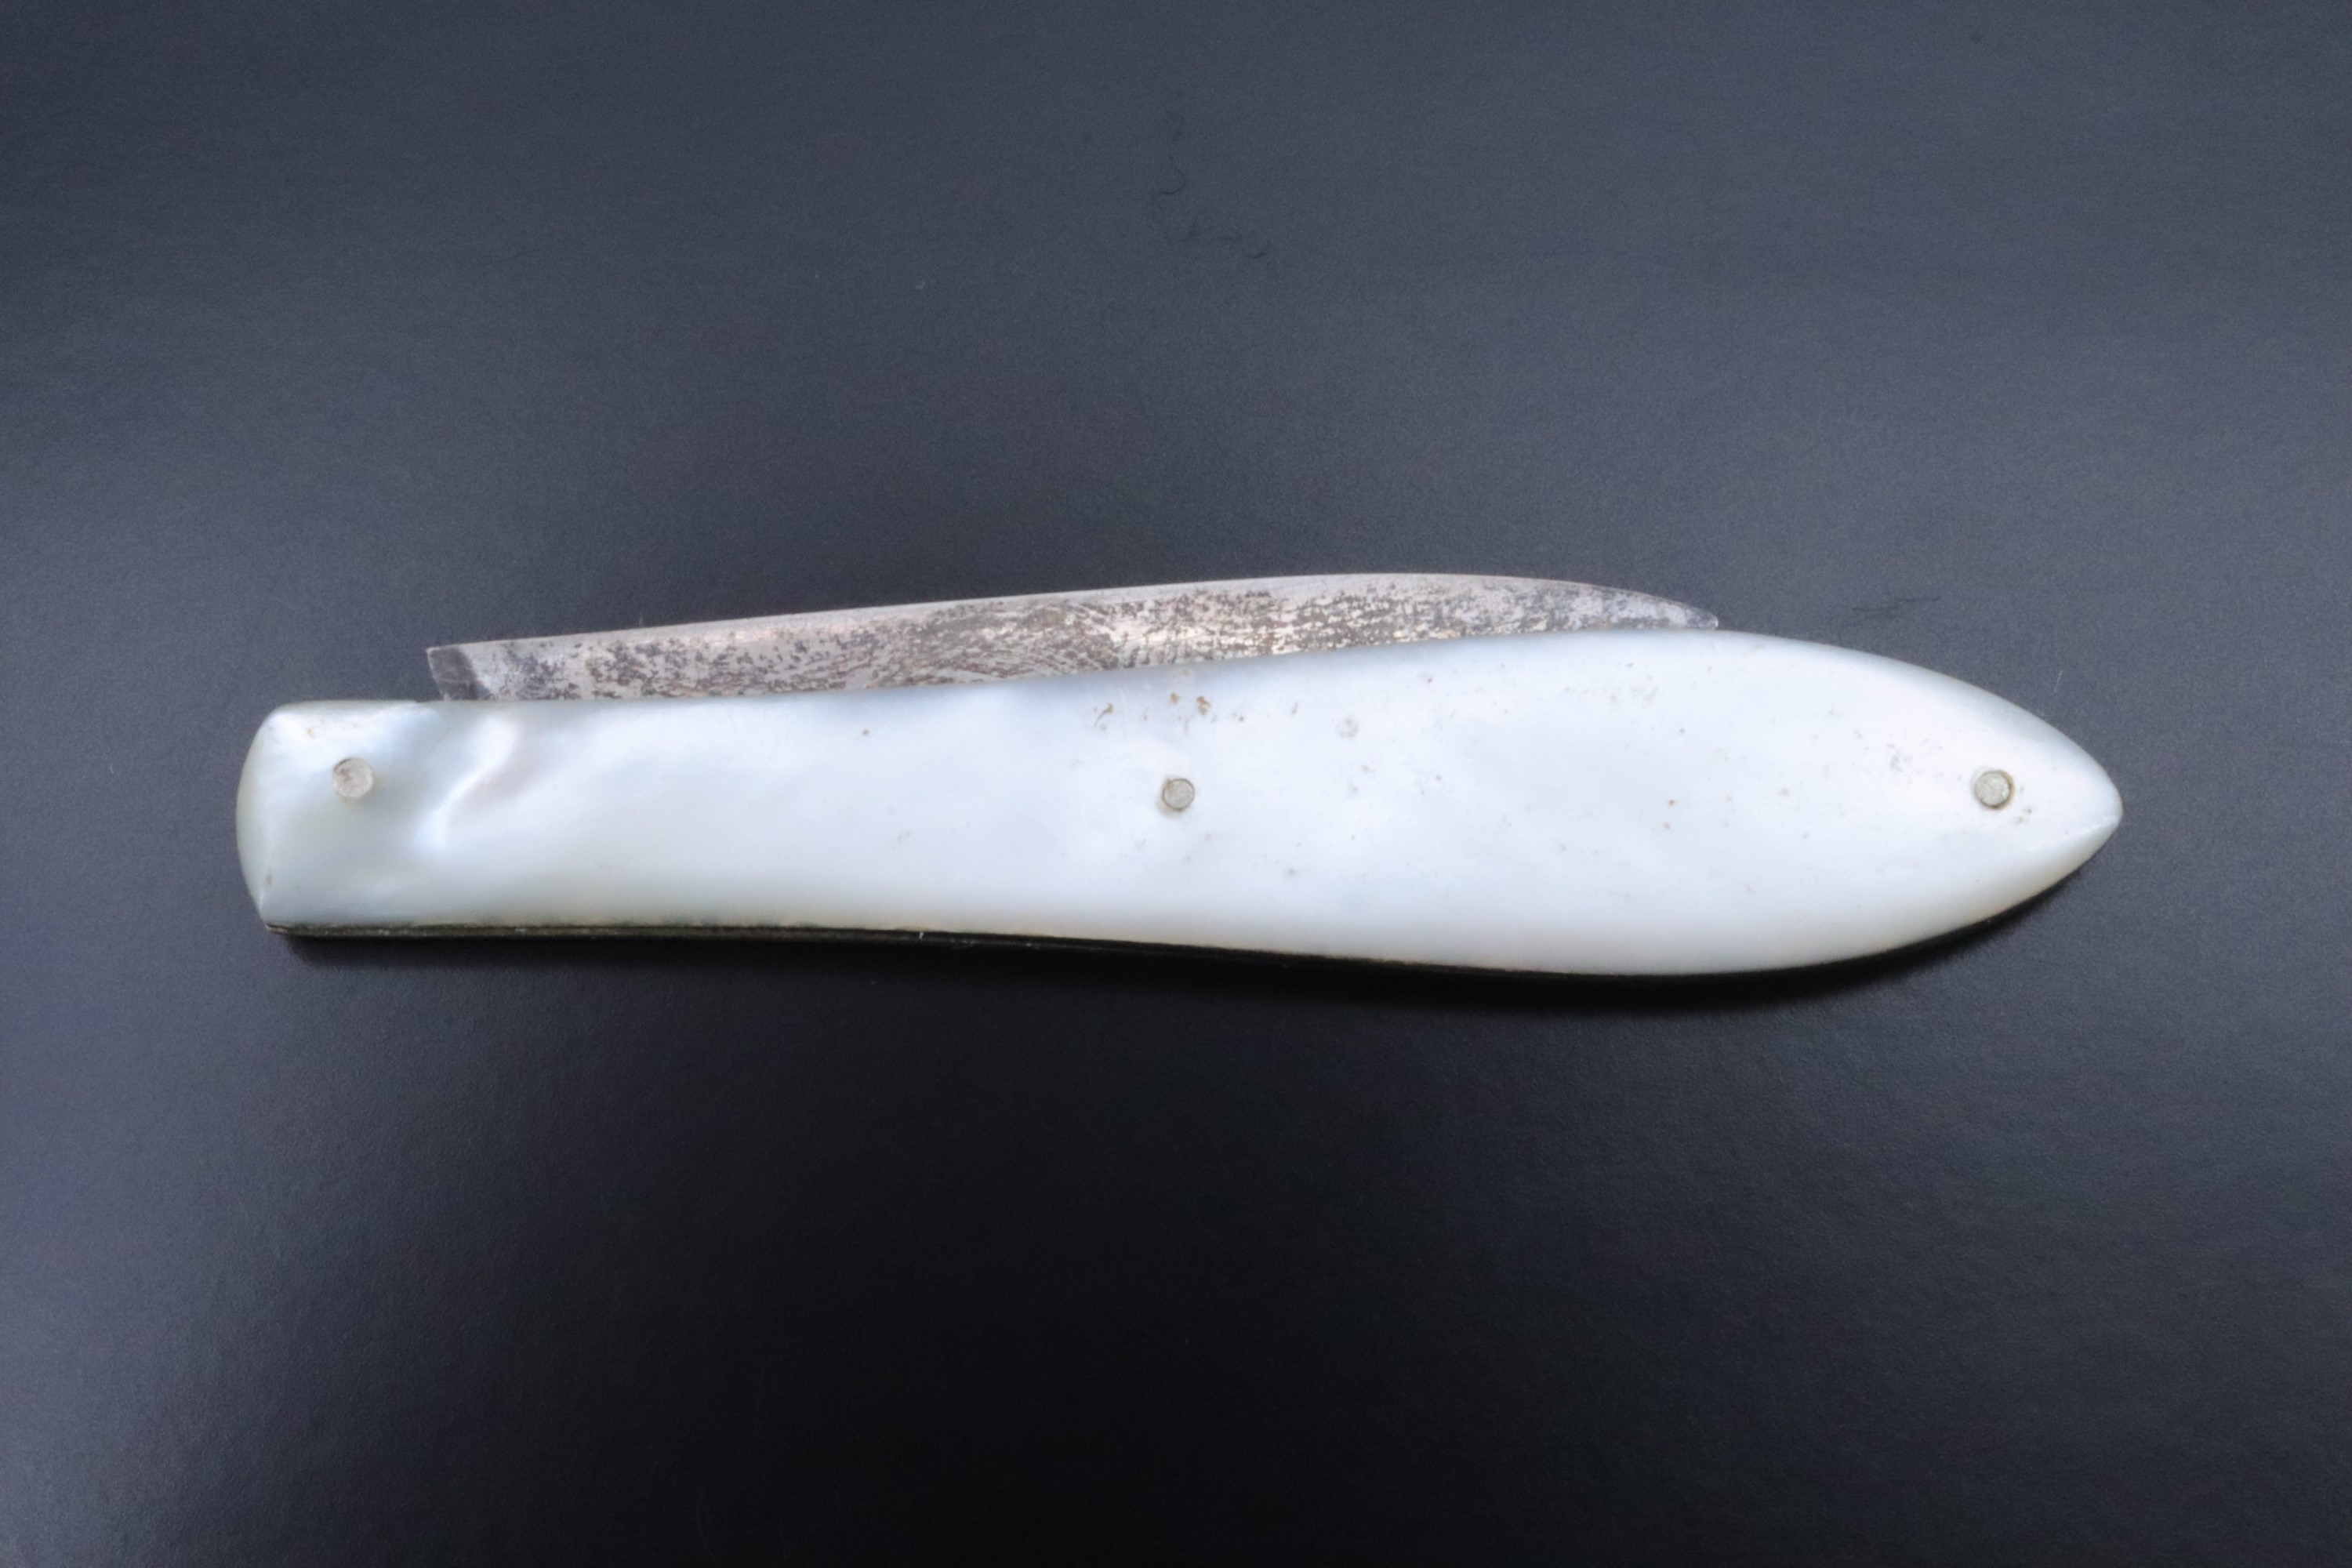 A Victorian pocket folding fruit knife, having mother-of-pearl grip scales and a silver blade, - Image 2 of 3